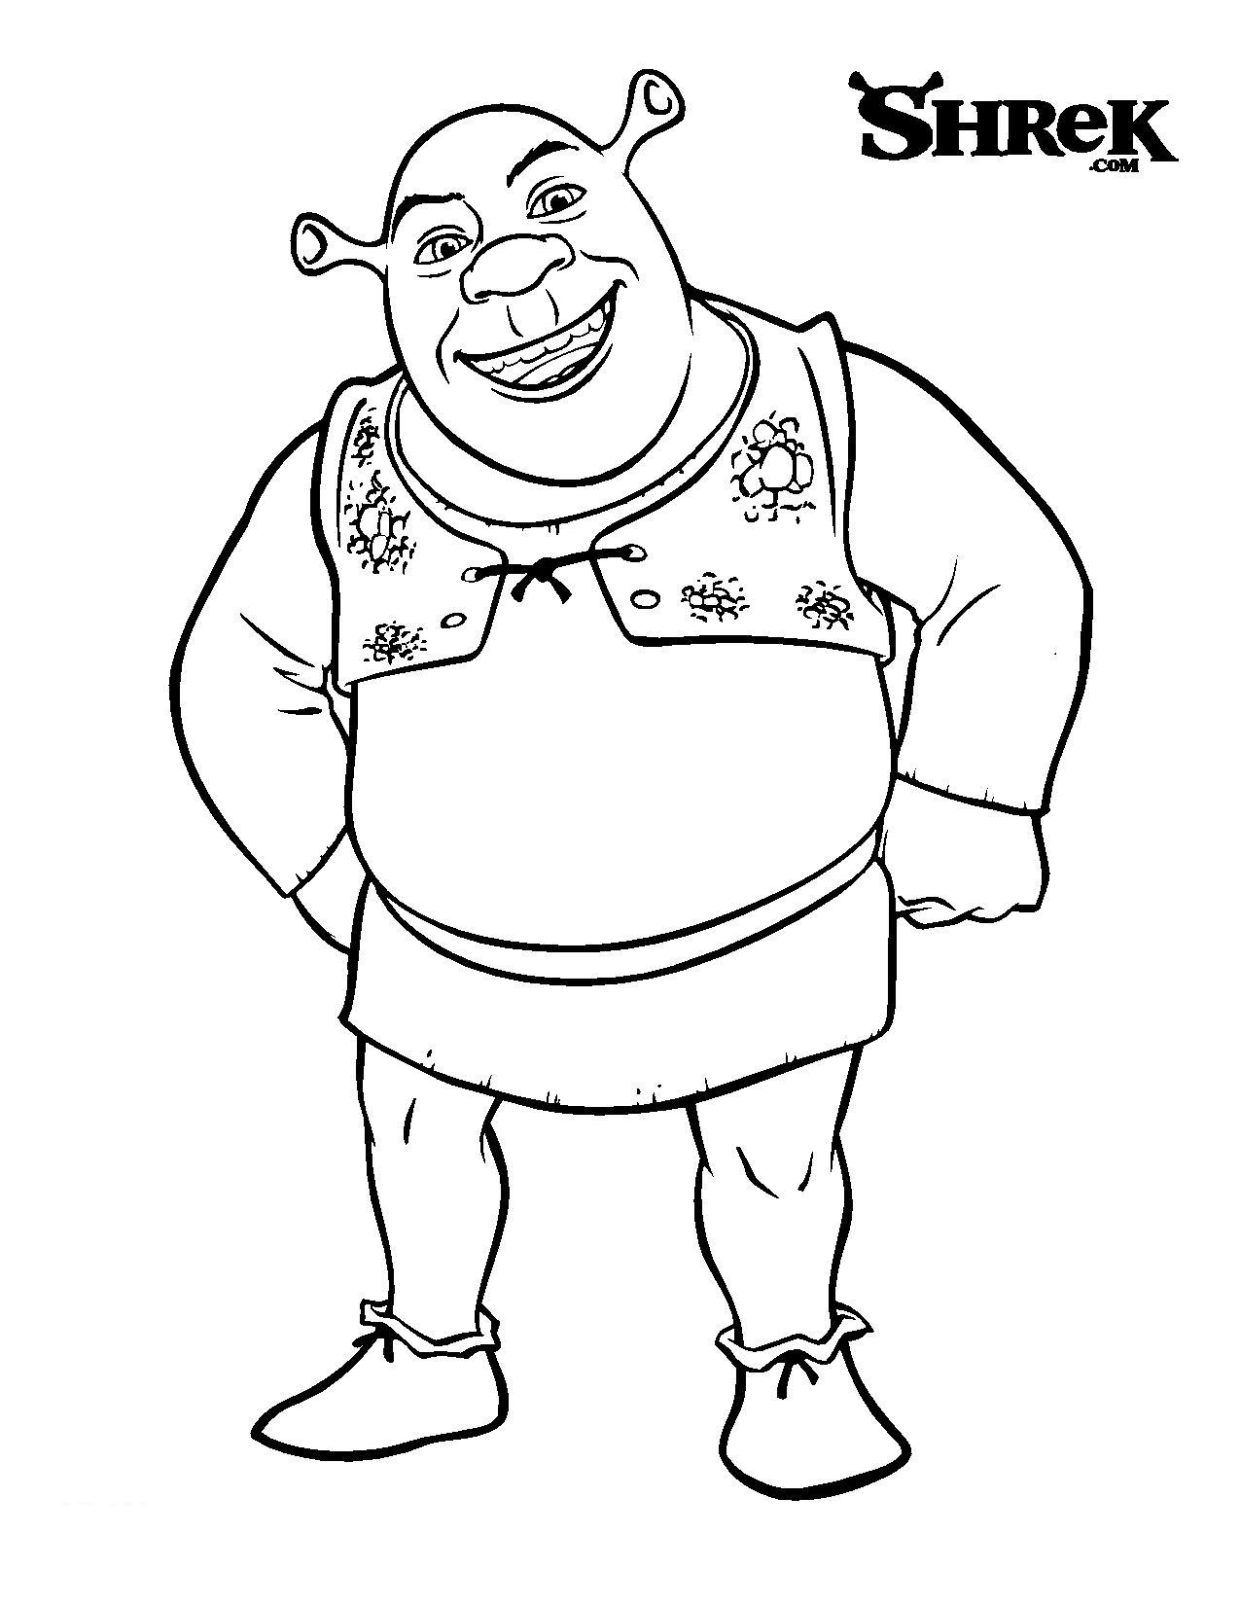 Shrek coloring pages free printable sheets for kids